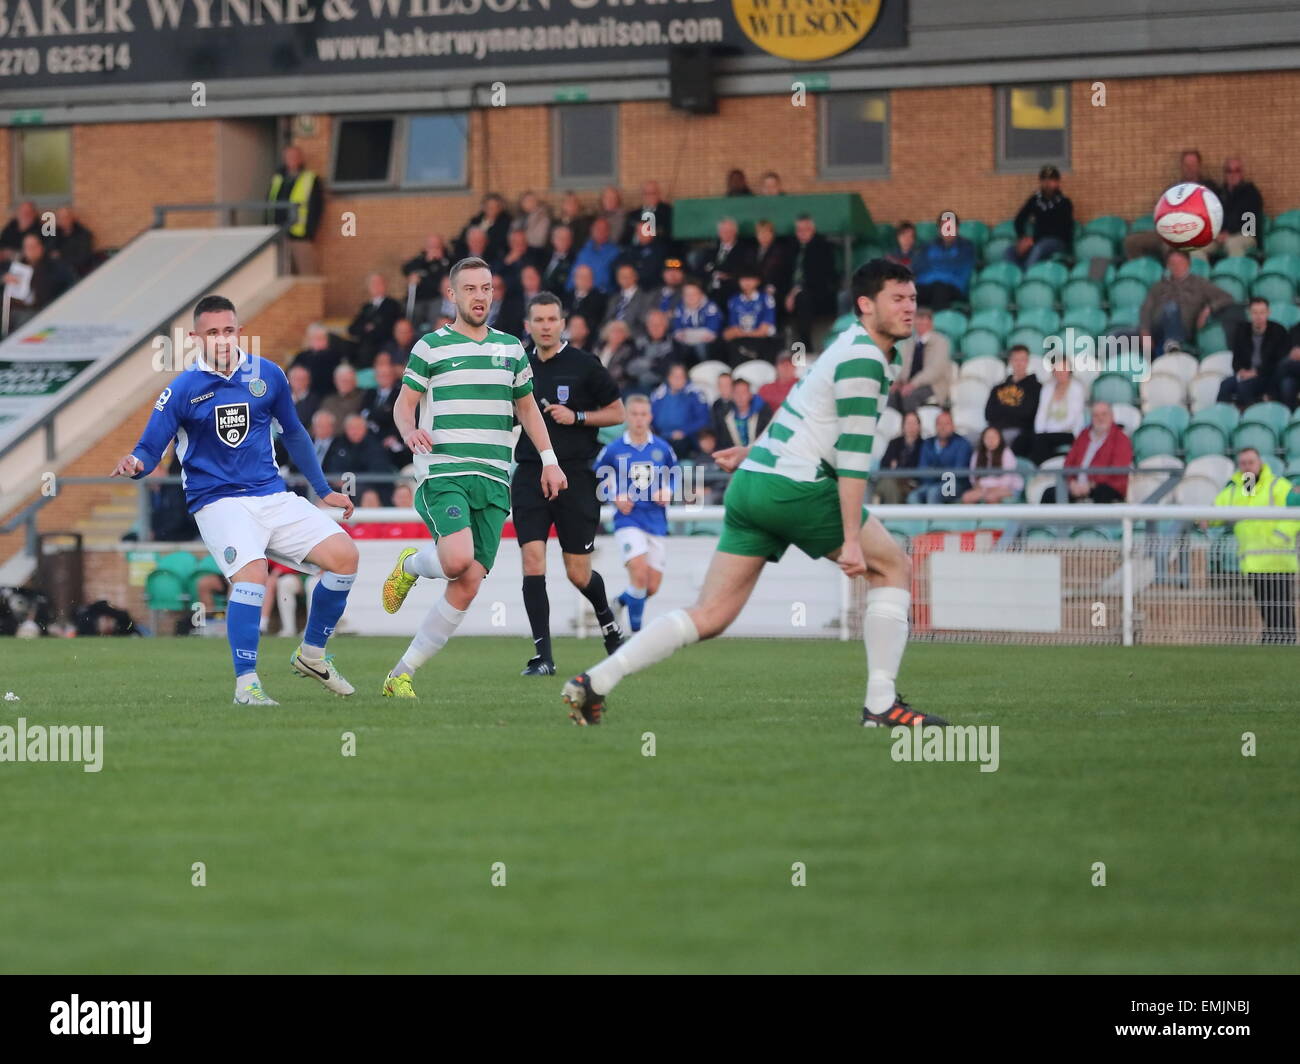 Nantwich, UK. 21st April, 2015. Macclesfield Town's Waide Fairhurst slots home to make it 1-0 to Macclesfield in the Cheshire Senior Cup Final at Nantwich Town. Credit:  Simon Newbury / Alamy Live News Stock Photo